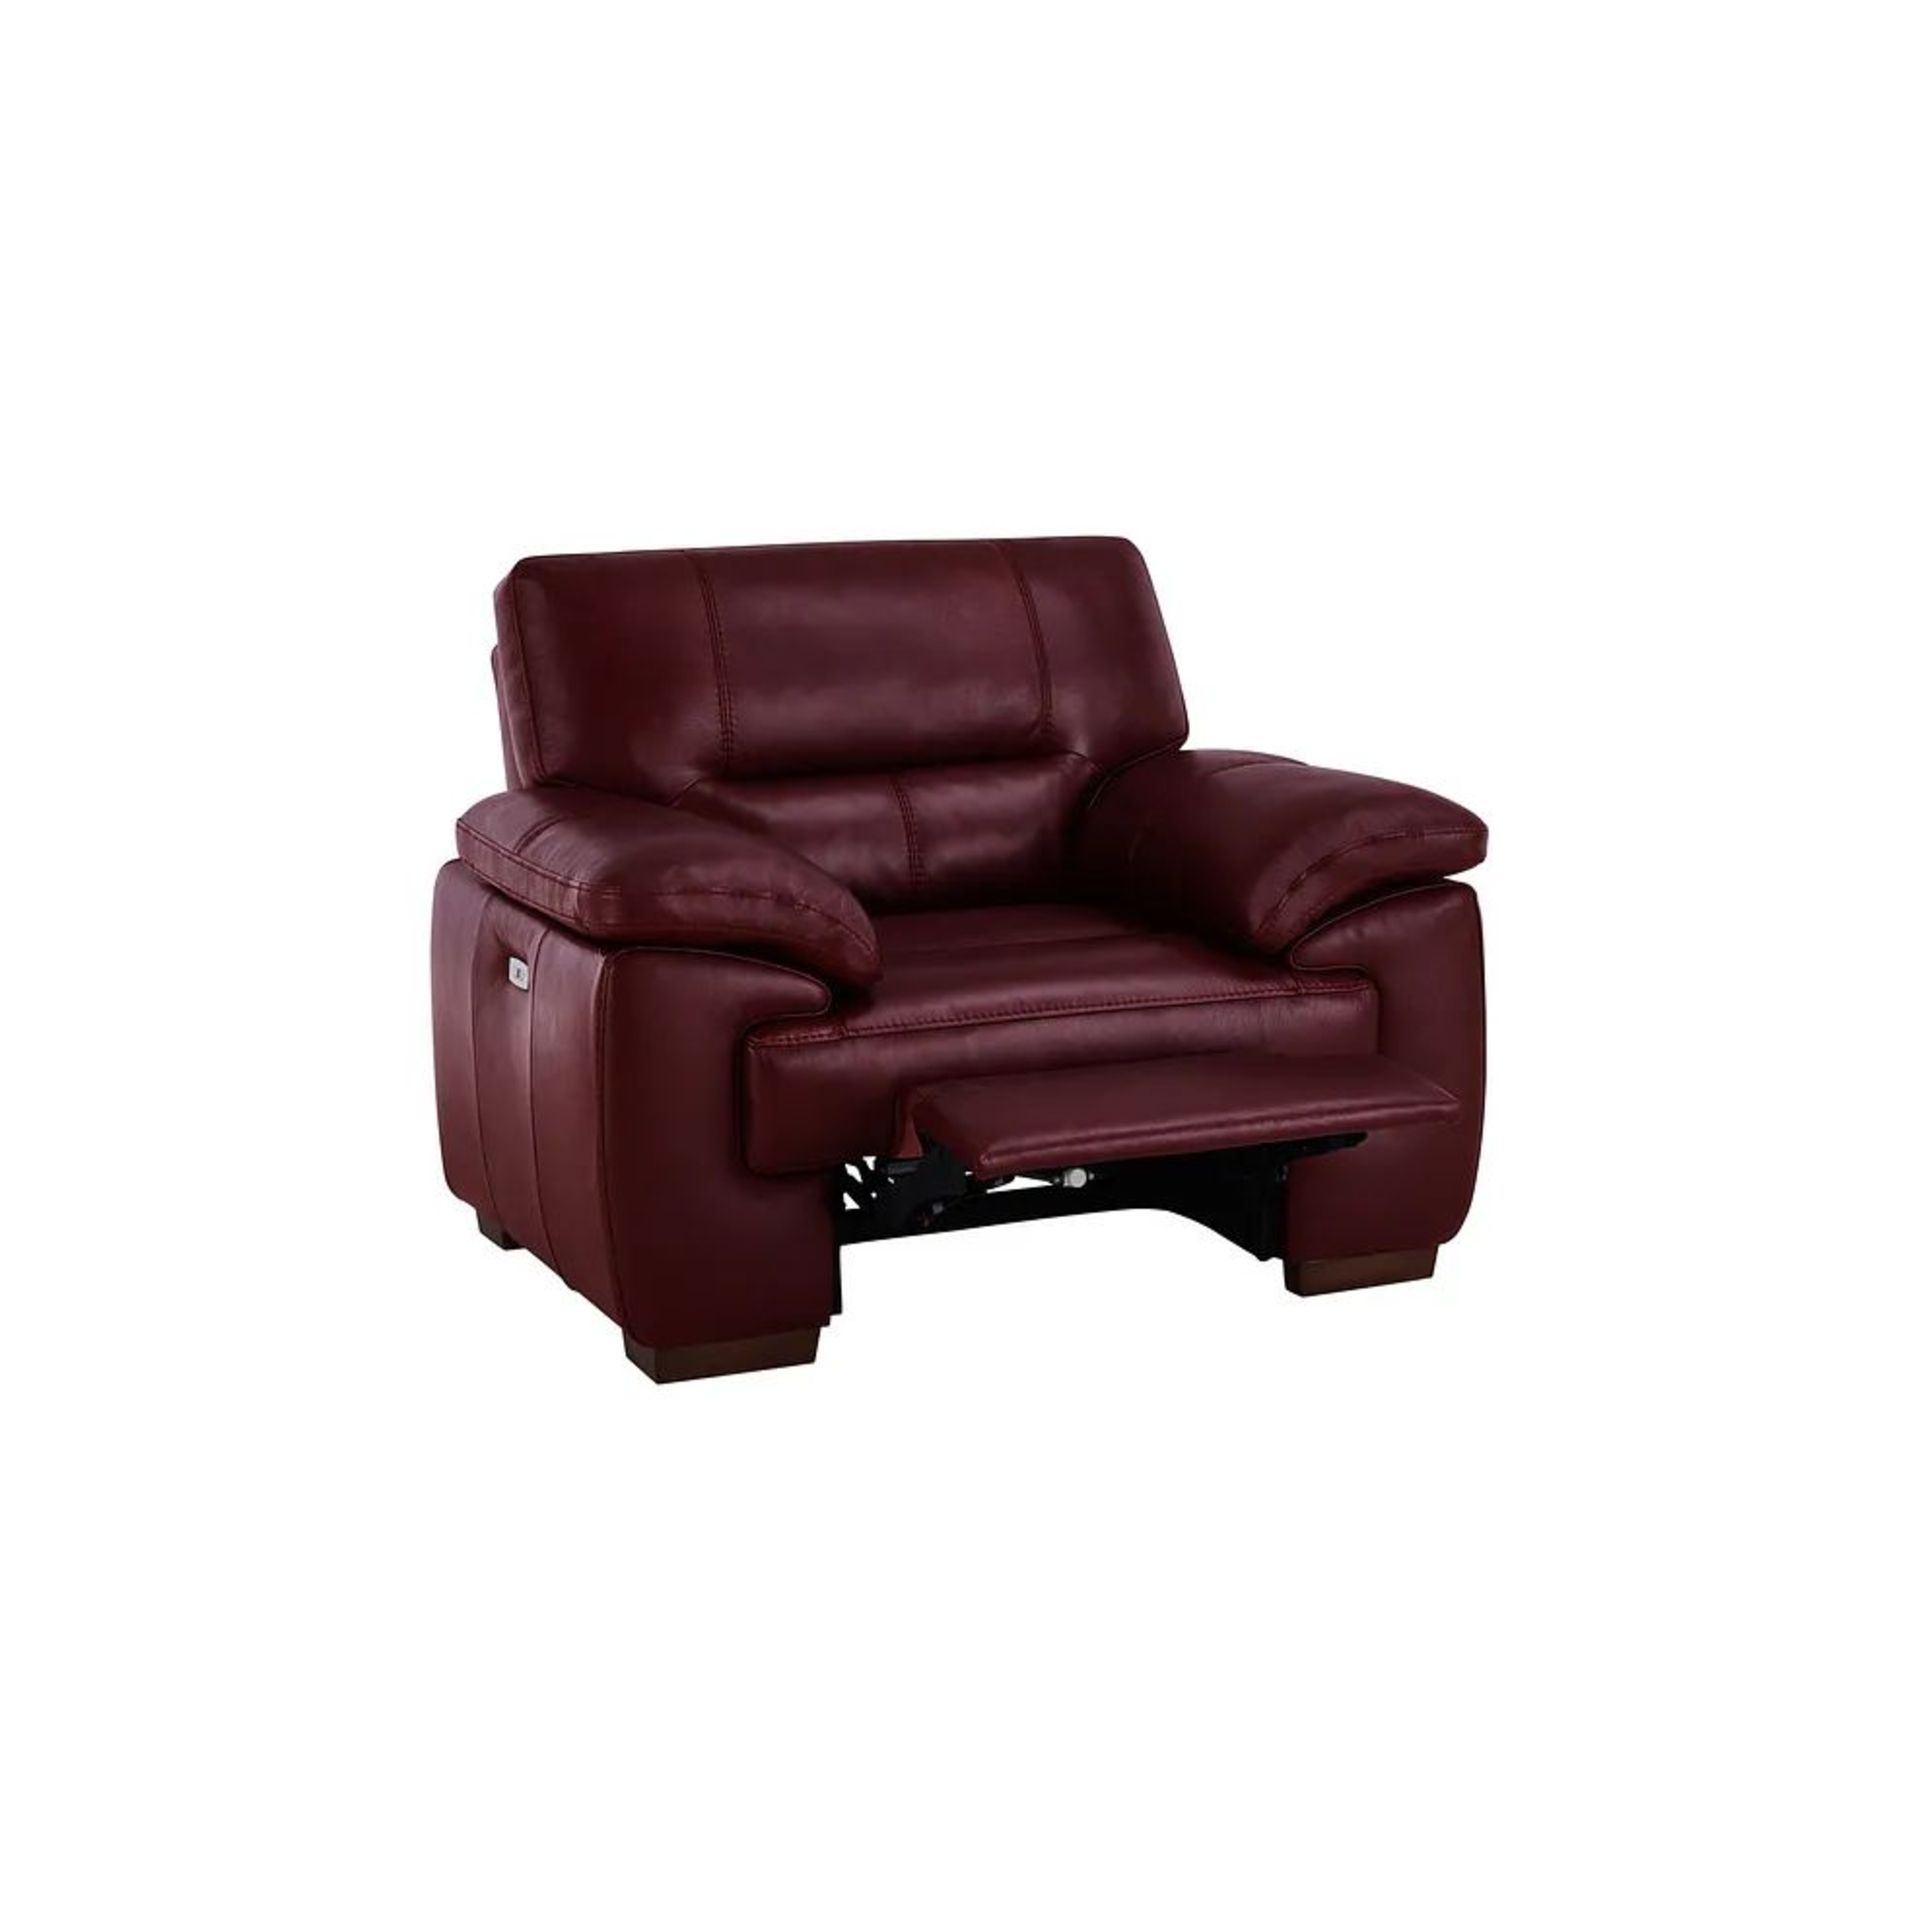 BRAND NEW ARLINGTON Electric Recliner Armchair - BURGANDY LEATHER. RRP £1199. Create a traditional - Image 4 of 12